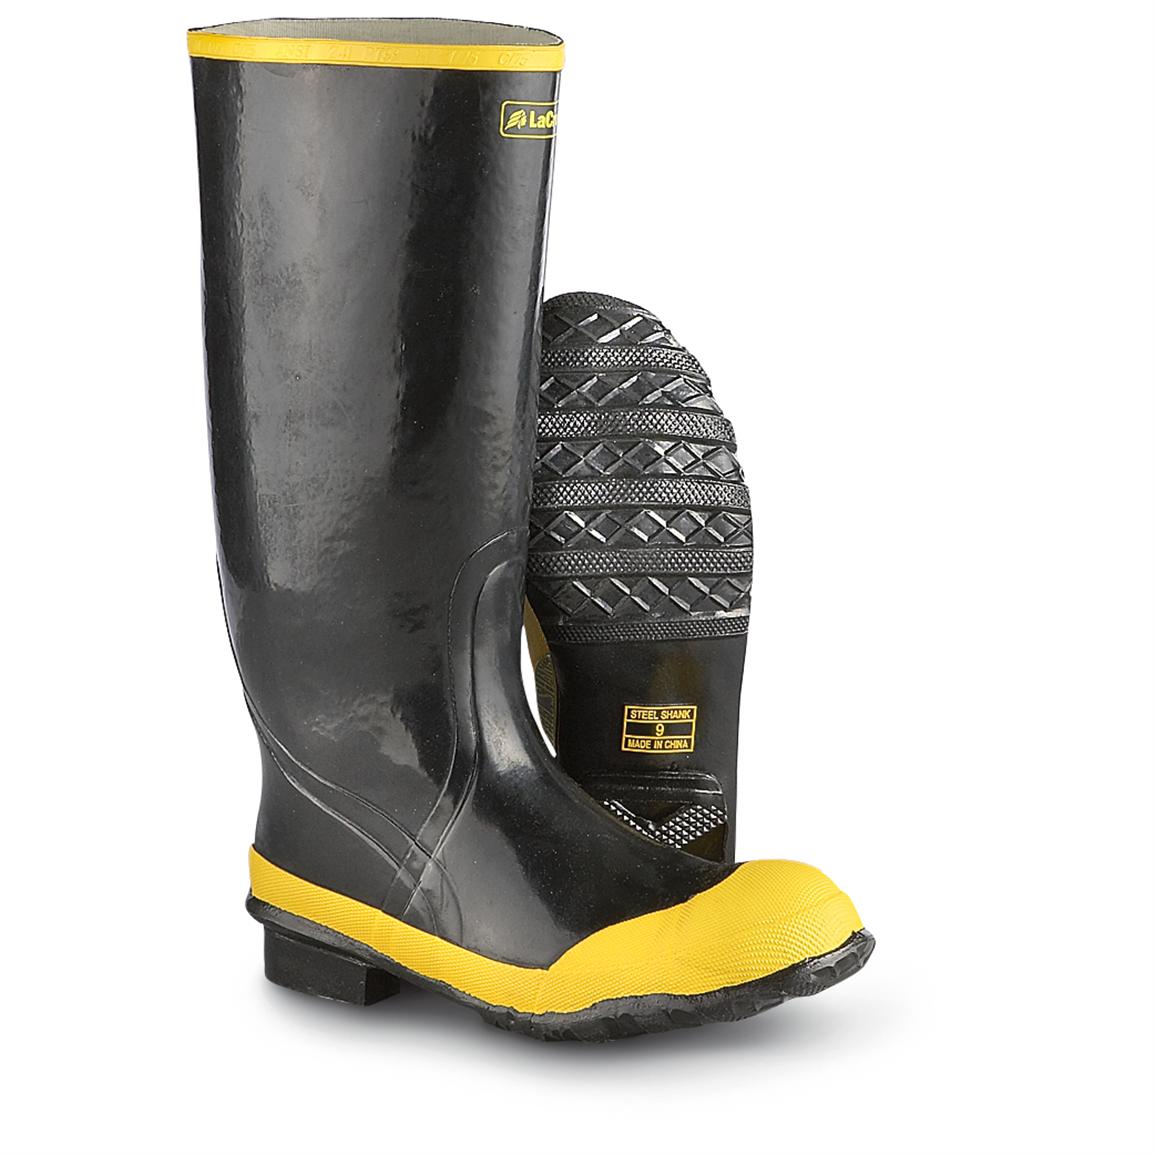 Special offer > lacrosse steel toe insulated rubber boots ...